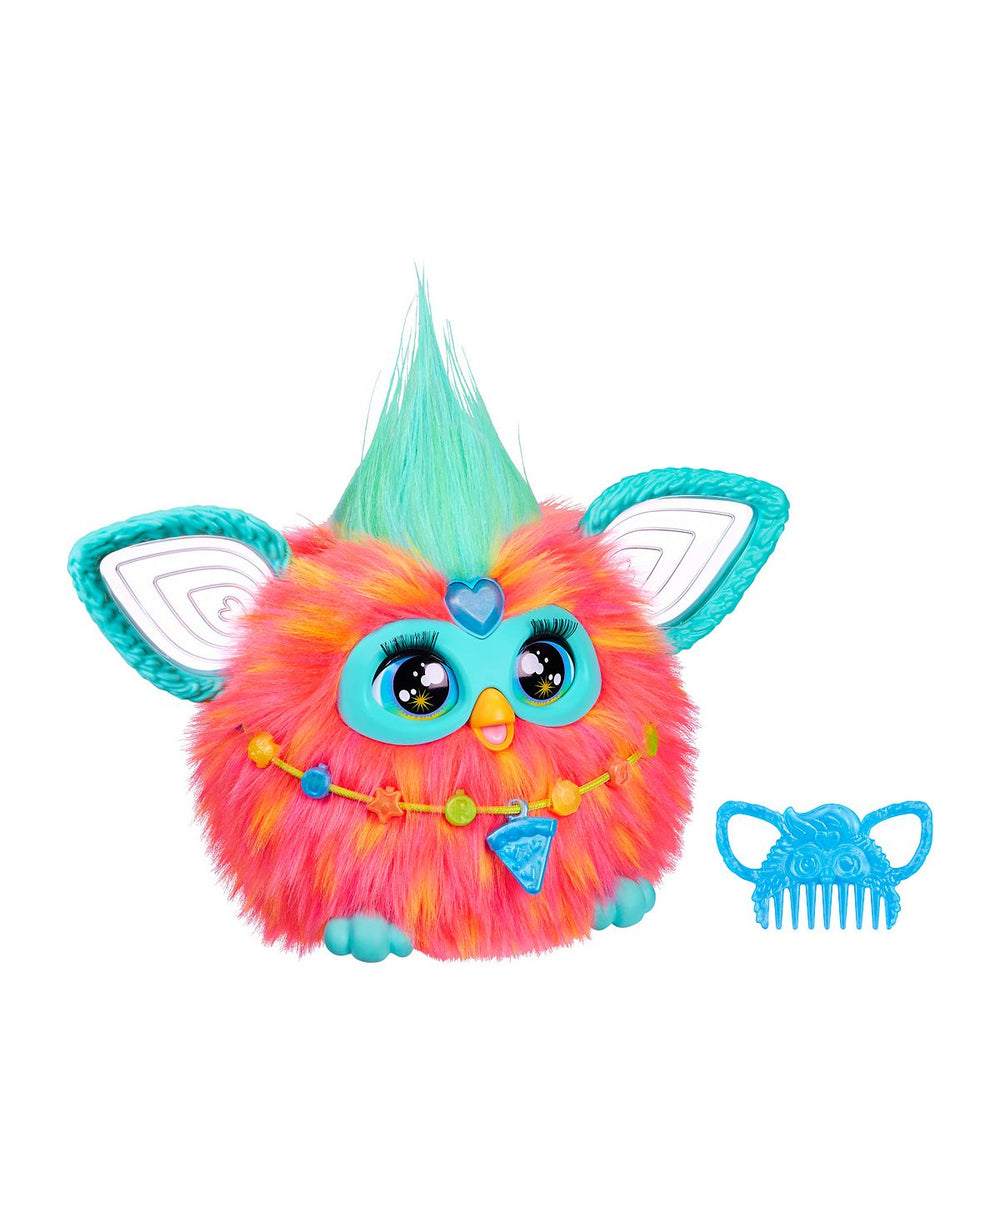 Furby Interactive Toy, Coral - Voice-Activated Plush Friend